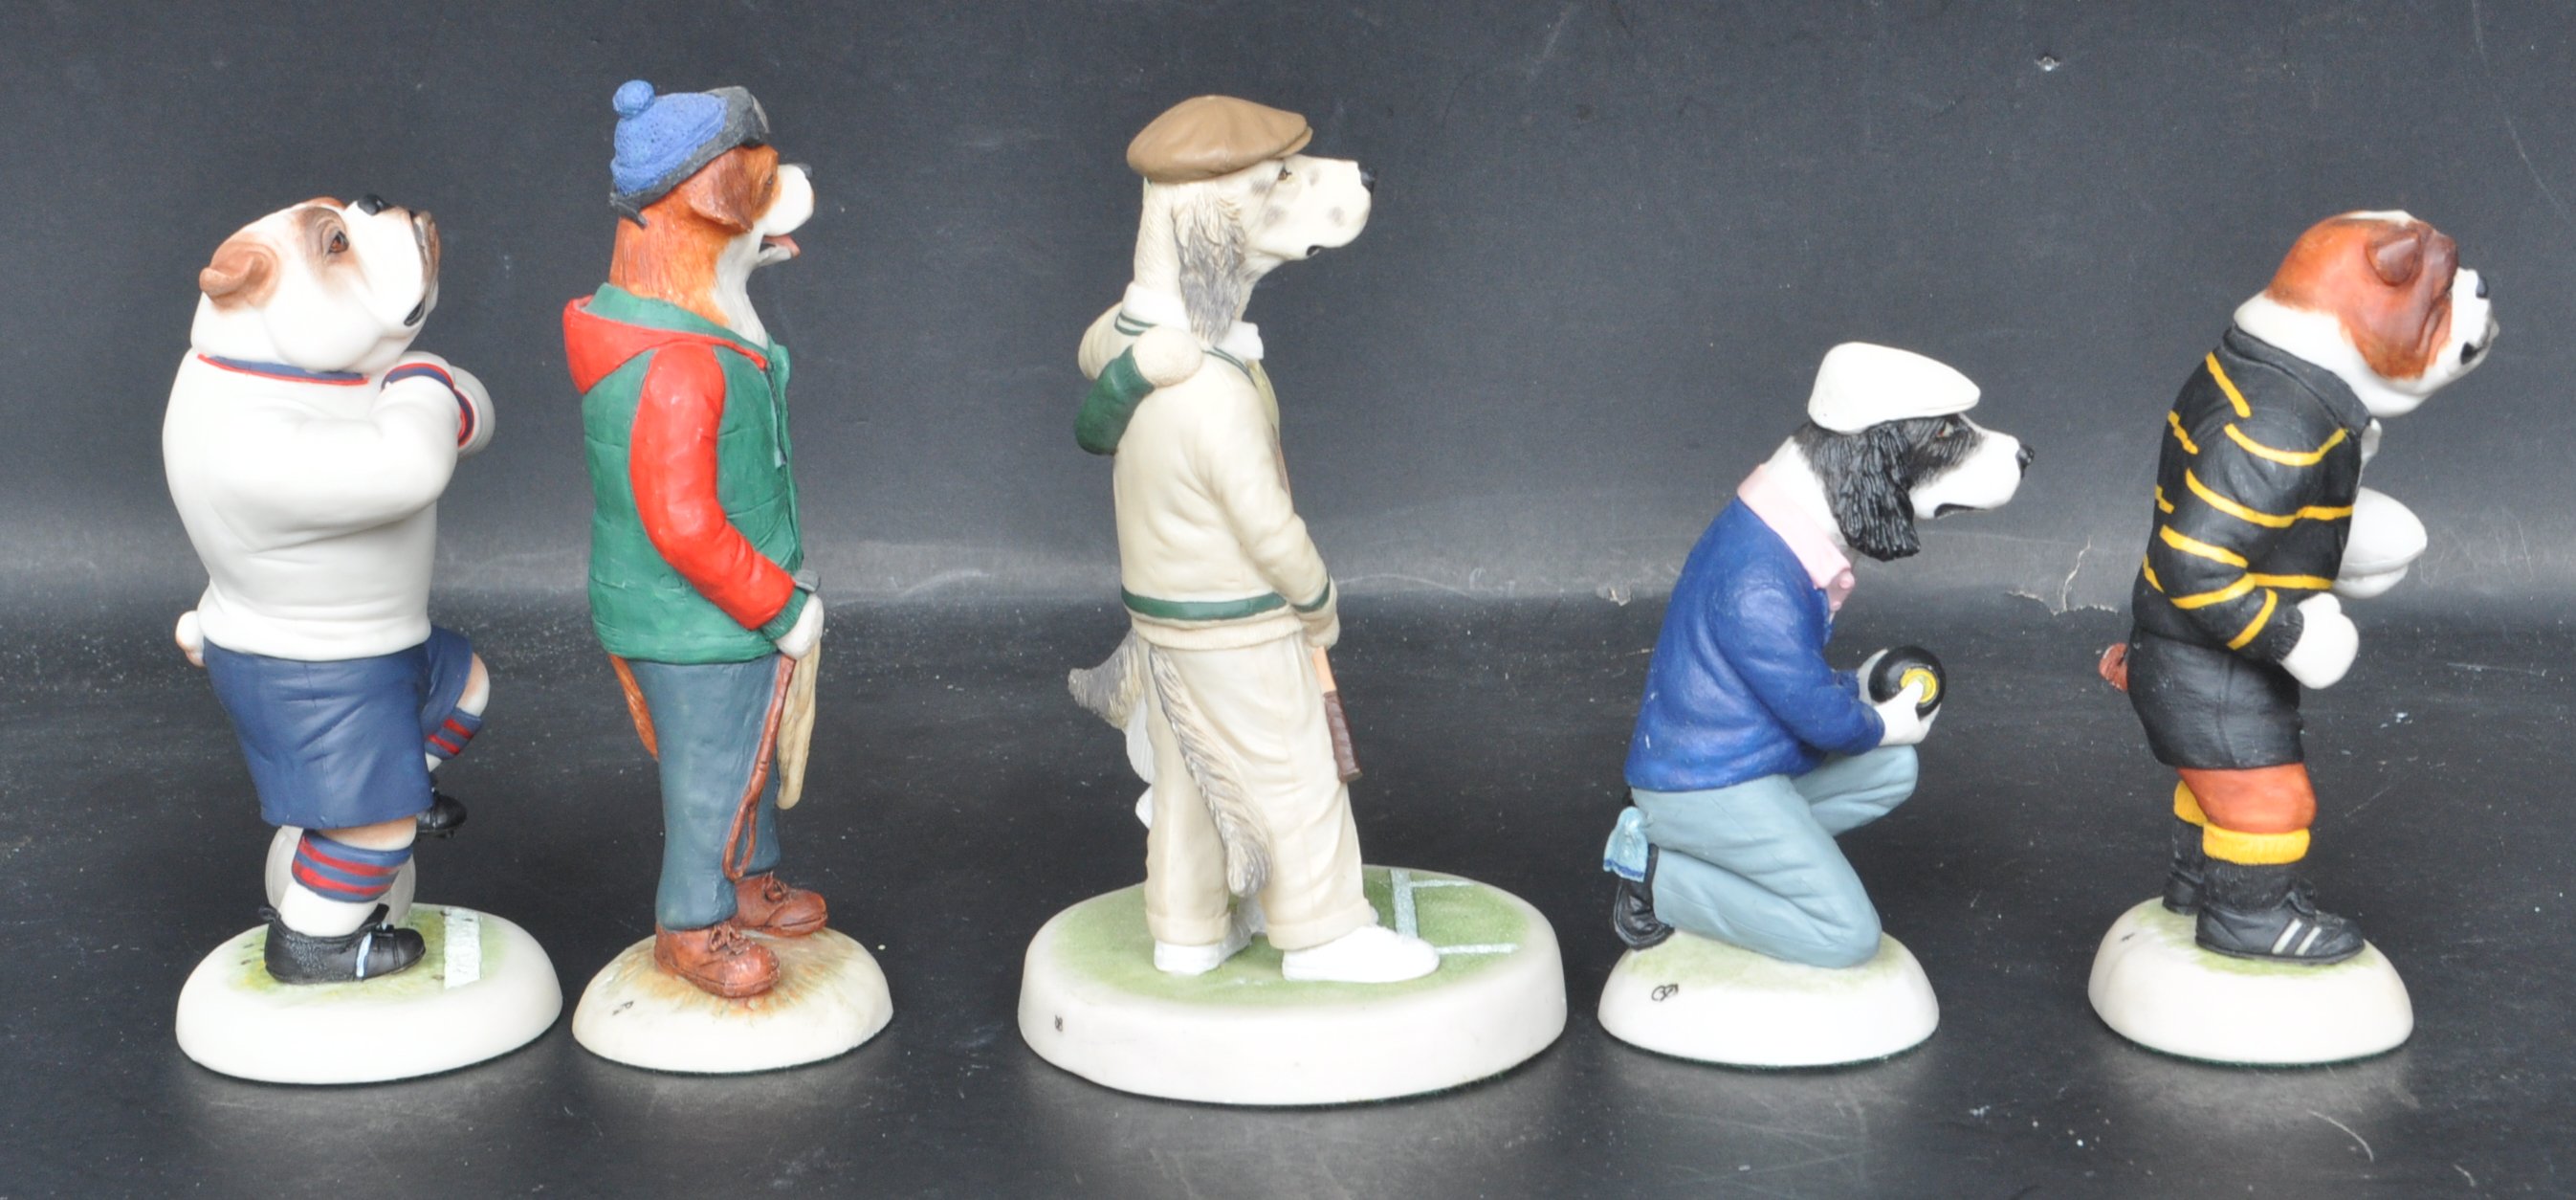 ROBERT HARROP - COUNTRY COMPANIONS COLLECTION OF FIVE RESIN FIGURES - Image 4 of 6